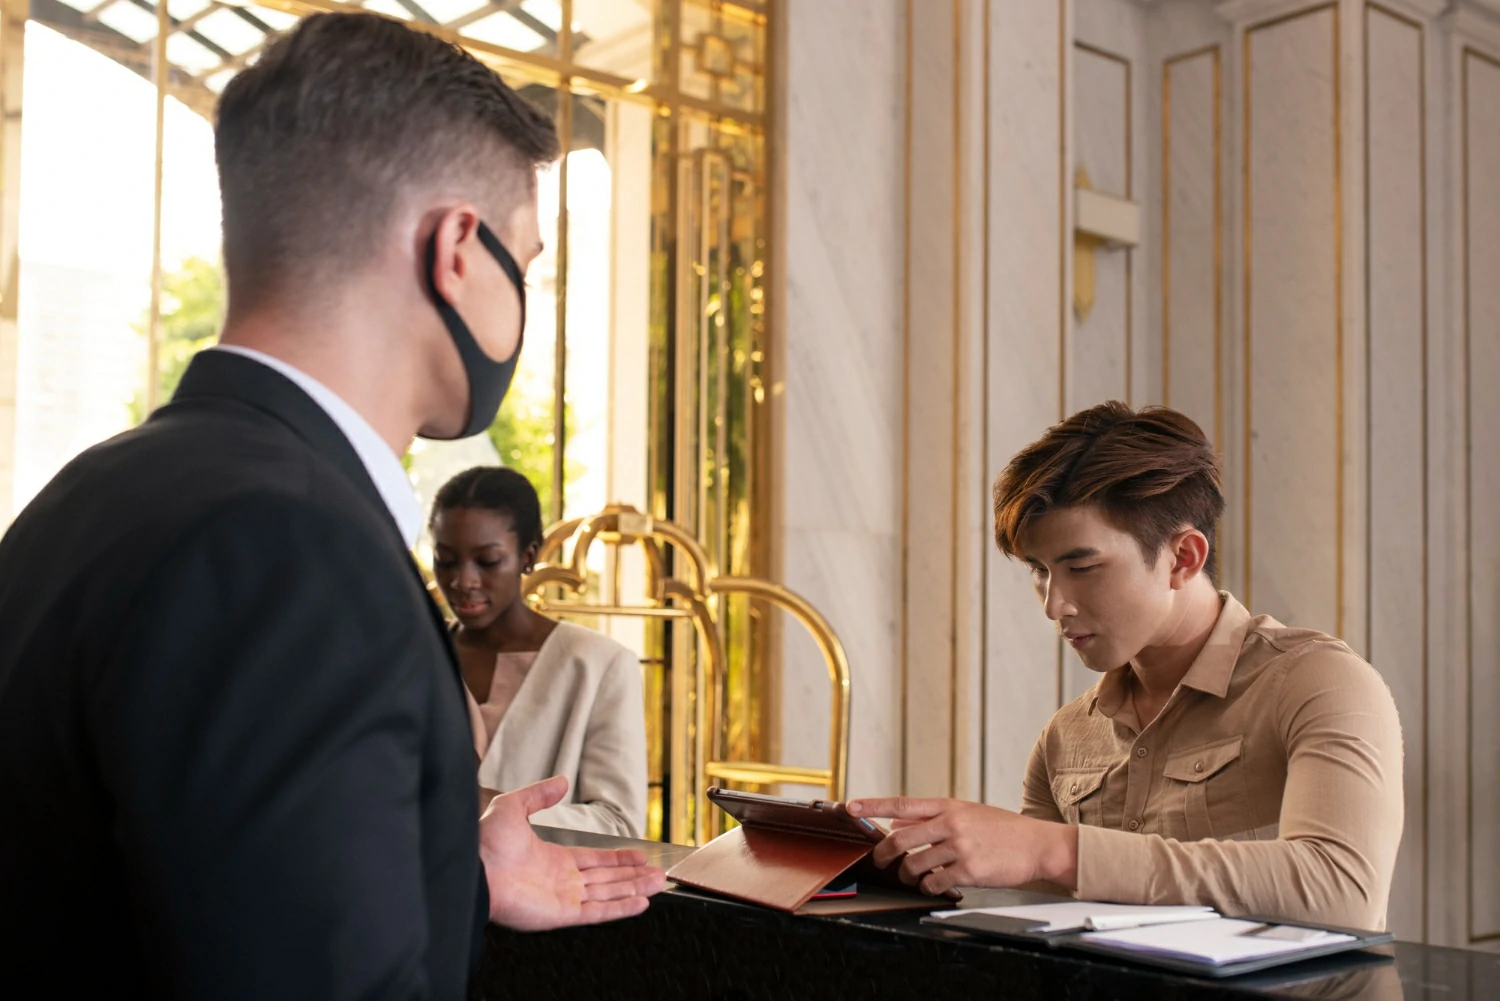 What Is Late Check-Out In a Hotel?